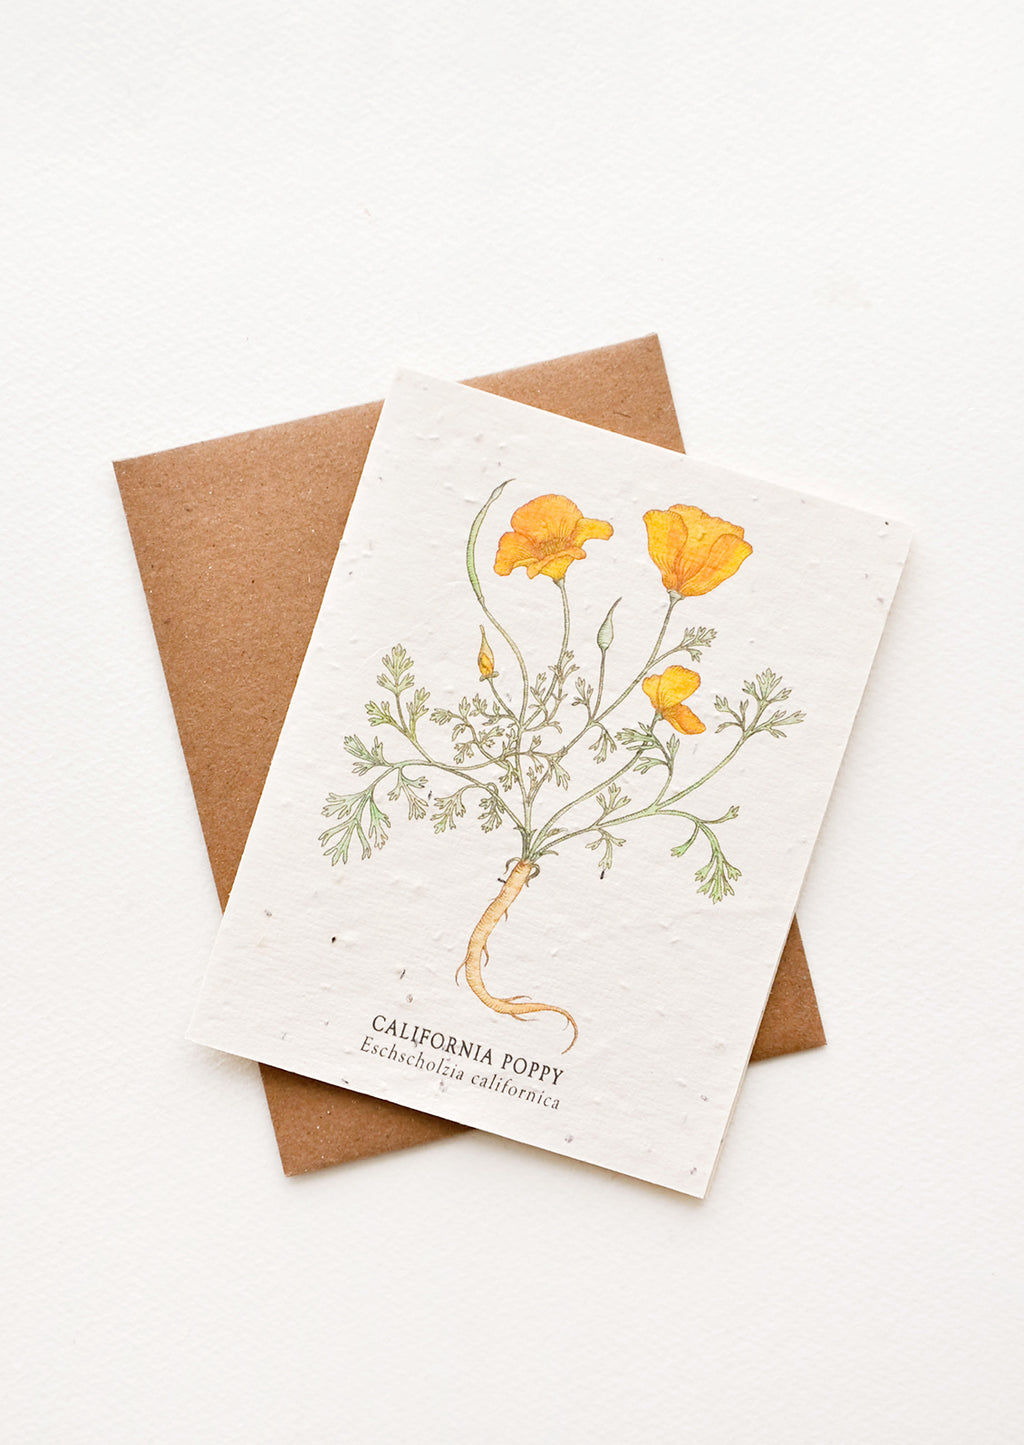 California Poppy: Notecard with drawing of a poppy flower and brown envelope.